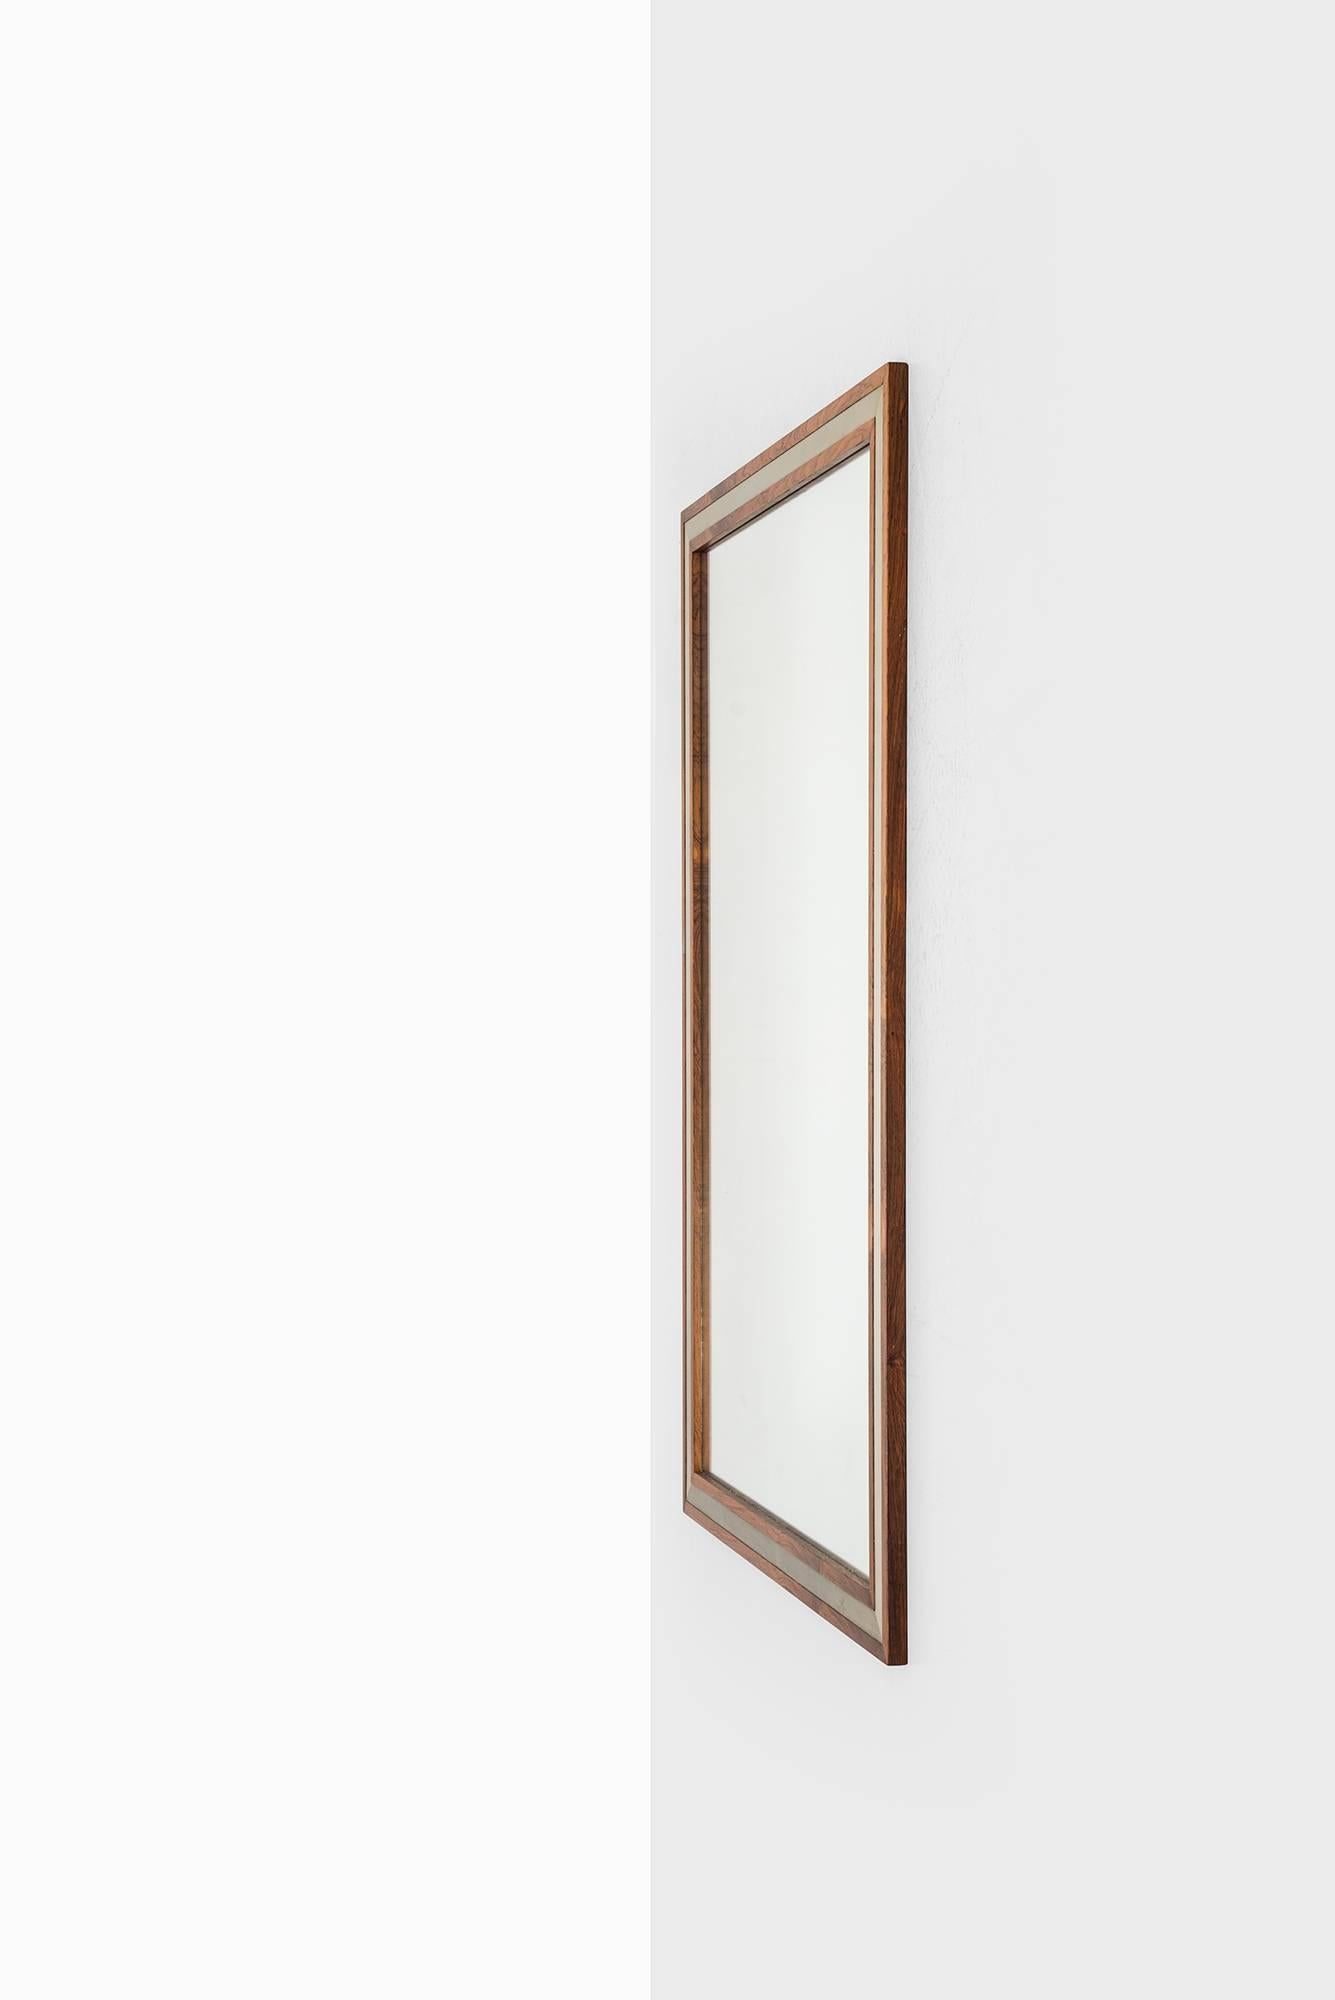 Rare and large mirror in rosewood designed by Aksel Kjersgaard. Produced by Odder in Denmark.